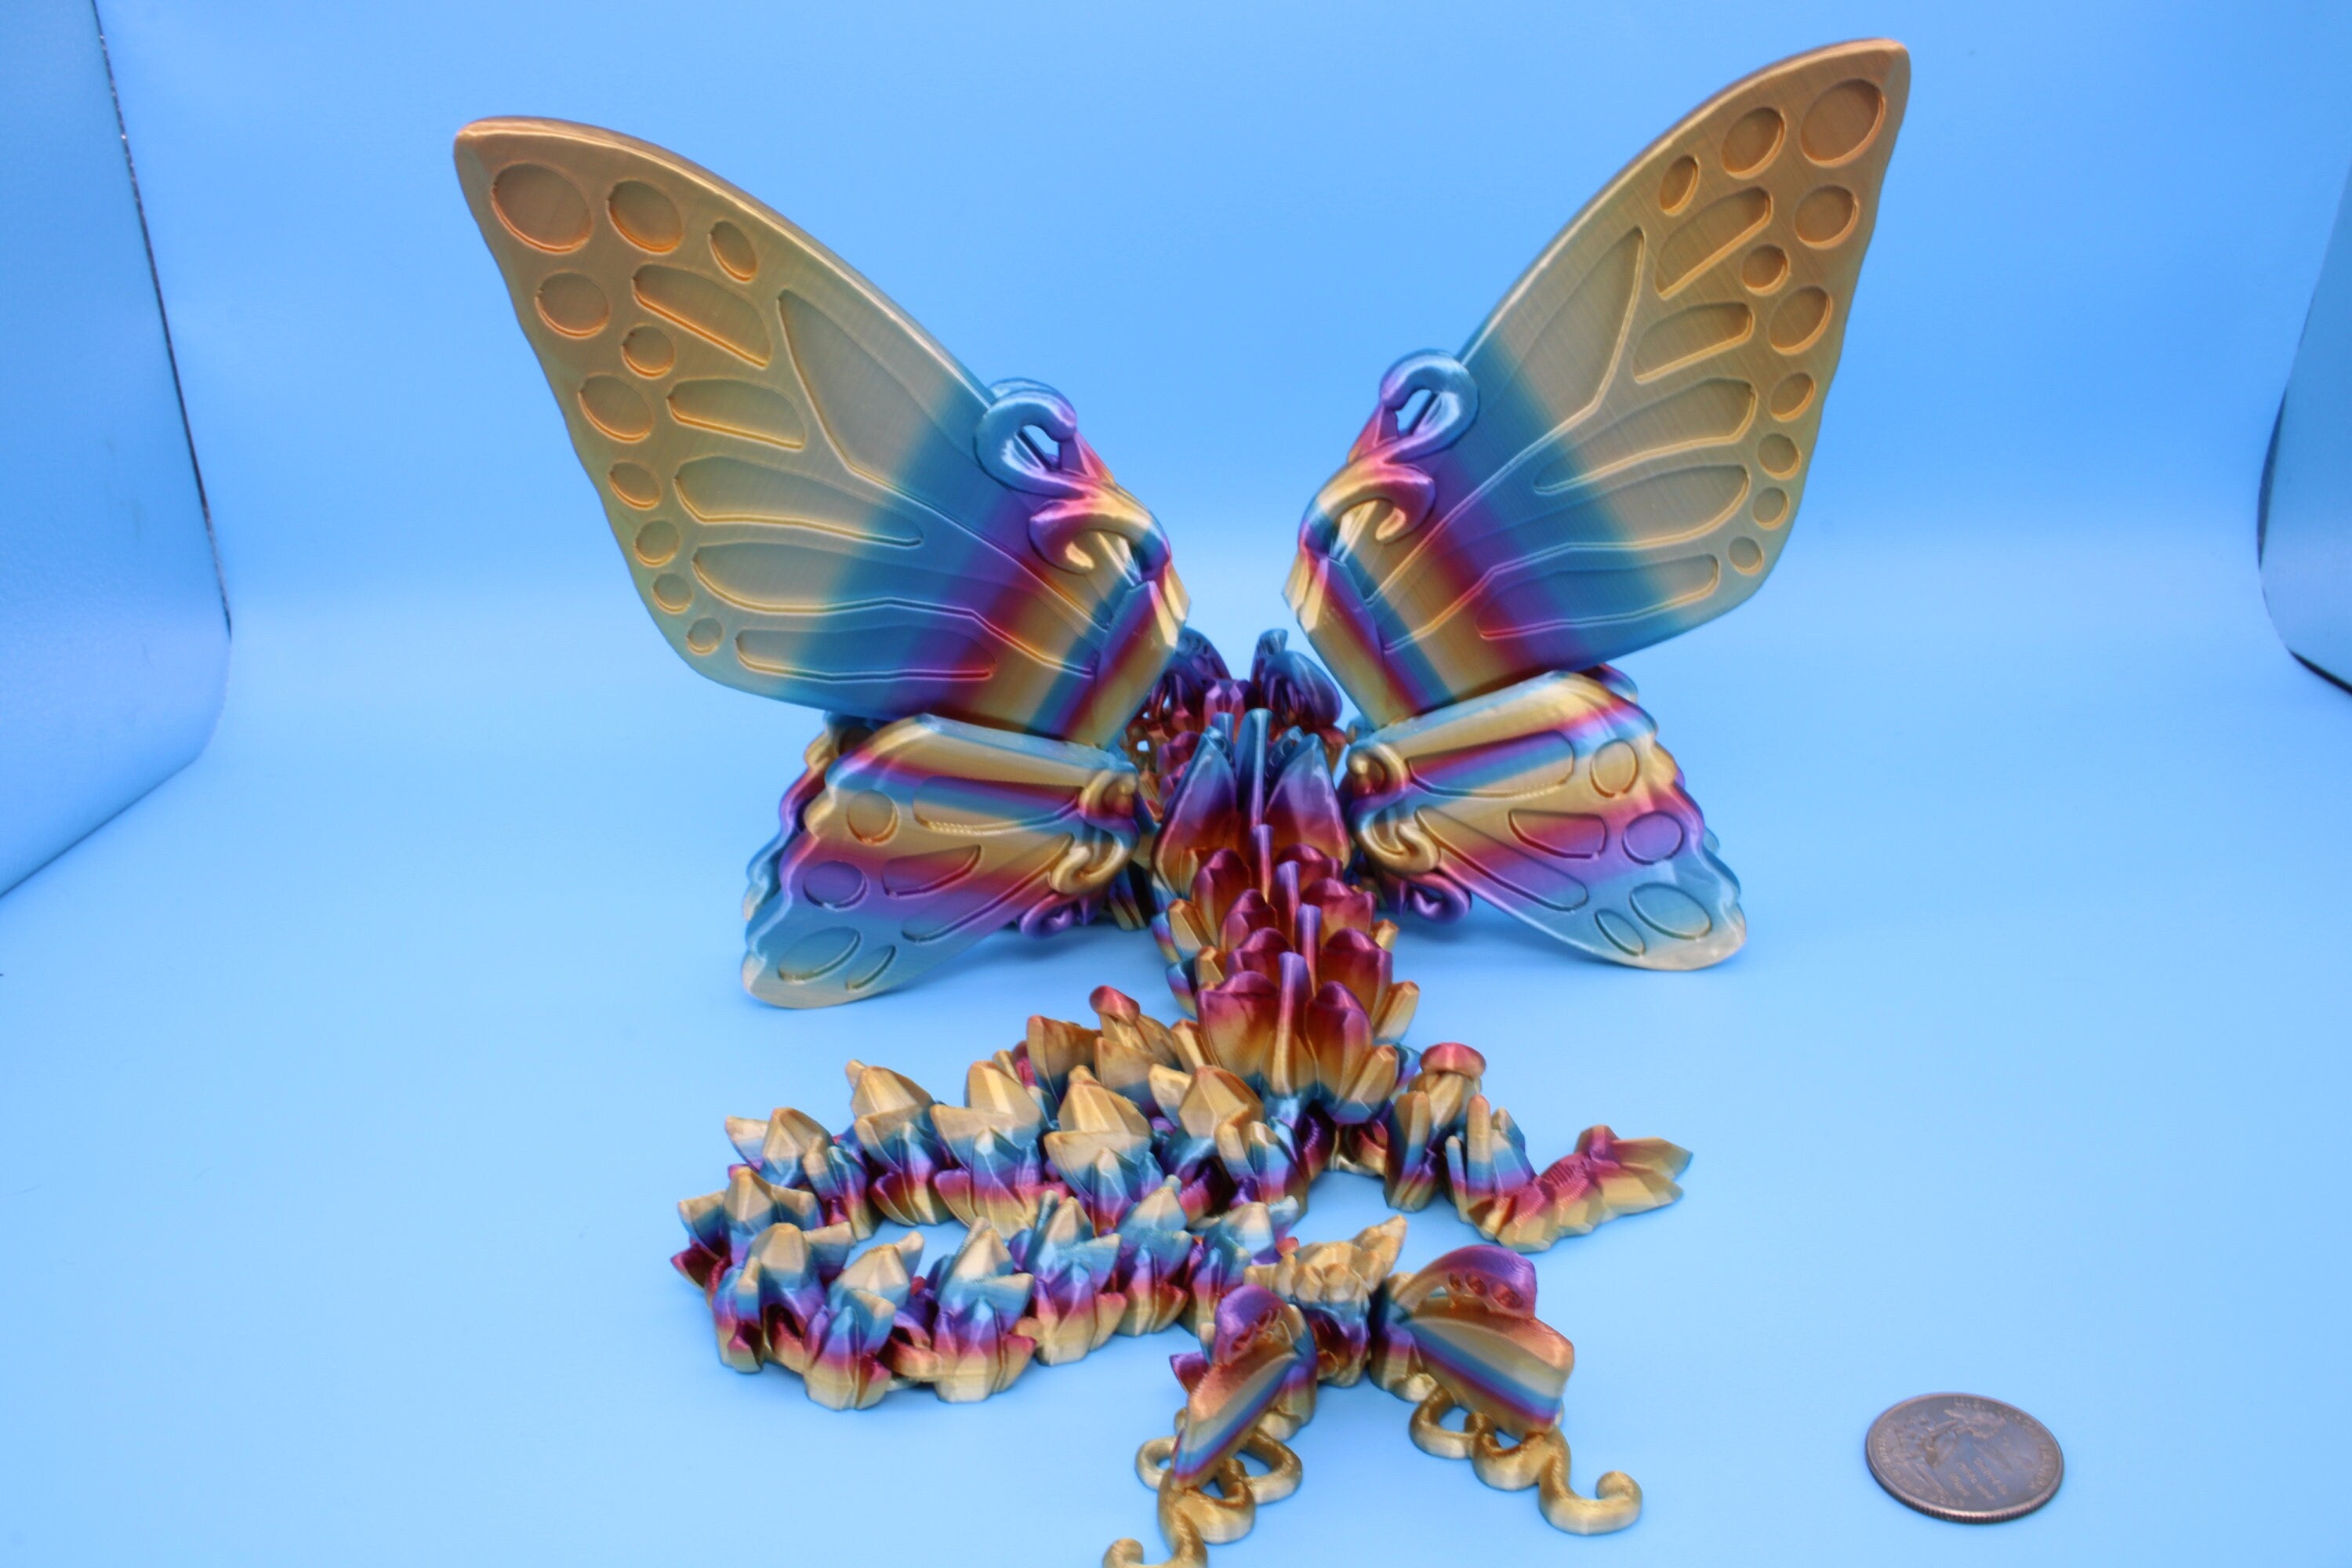 Butterfly Wing Dragon | 3D Printed Articulating Dragon 18 in.